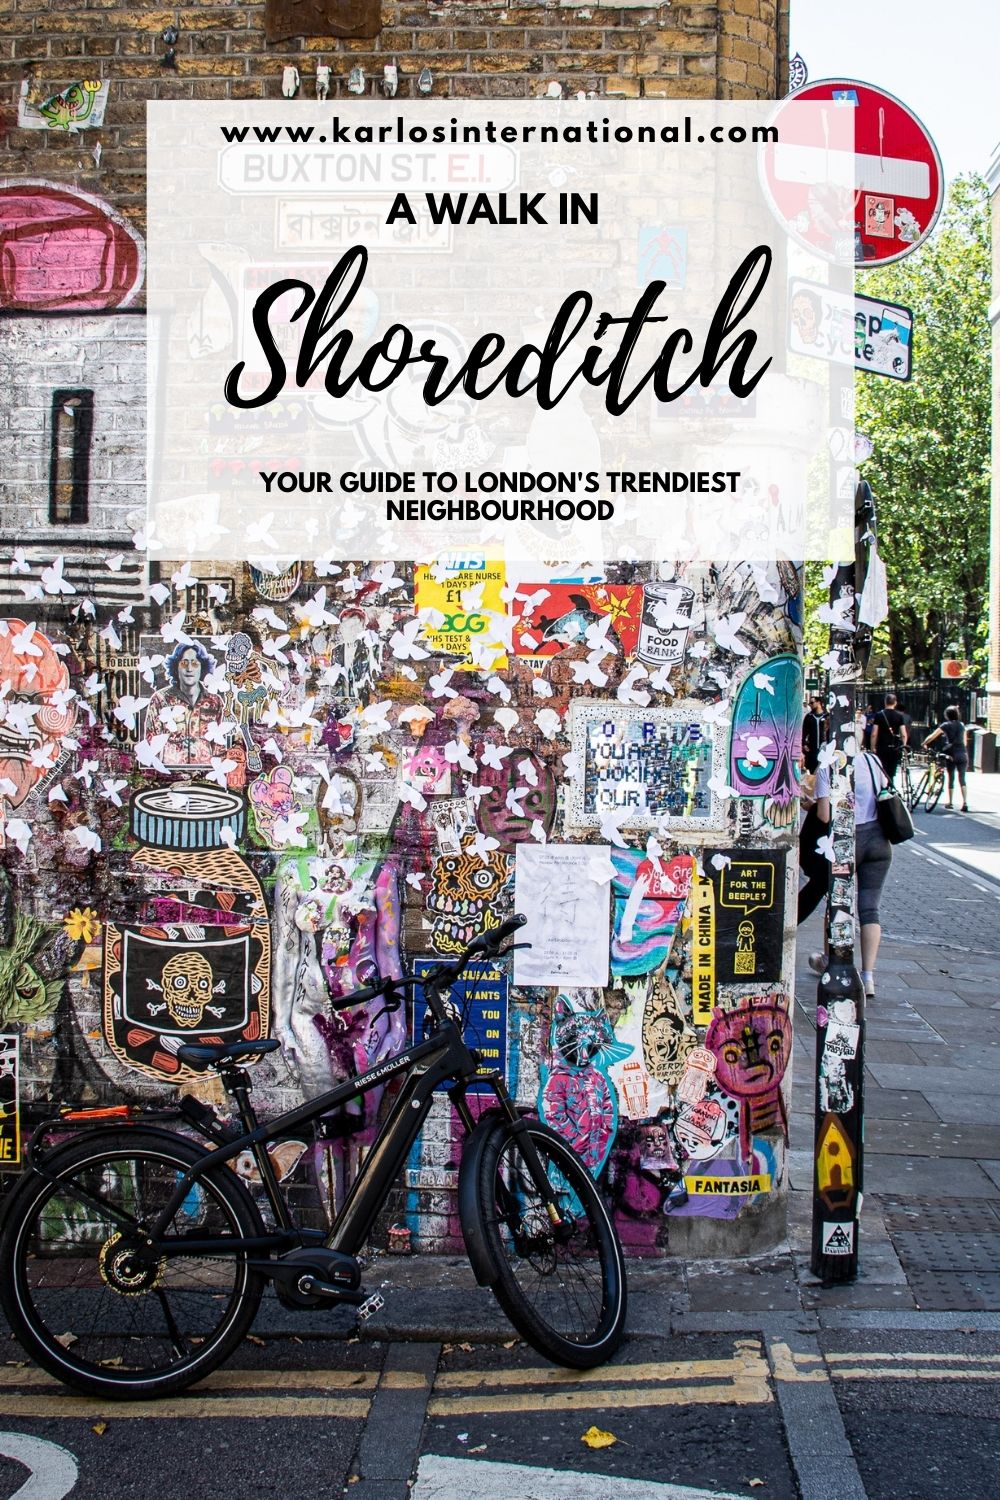 A Walk in Shoreditch - My guide to the best things to do in Shoreditch.